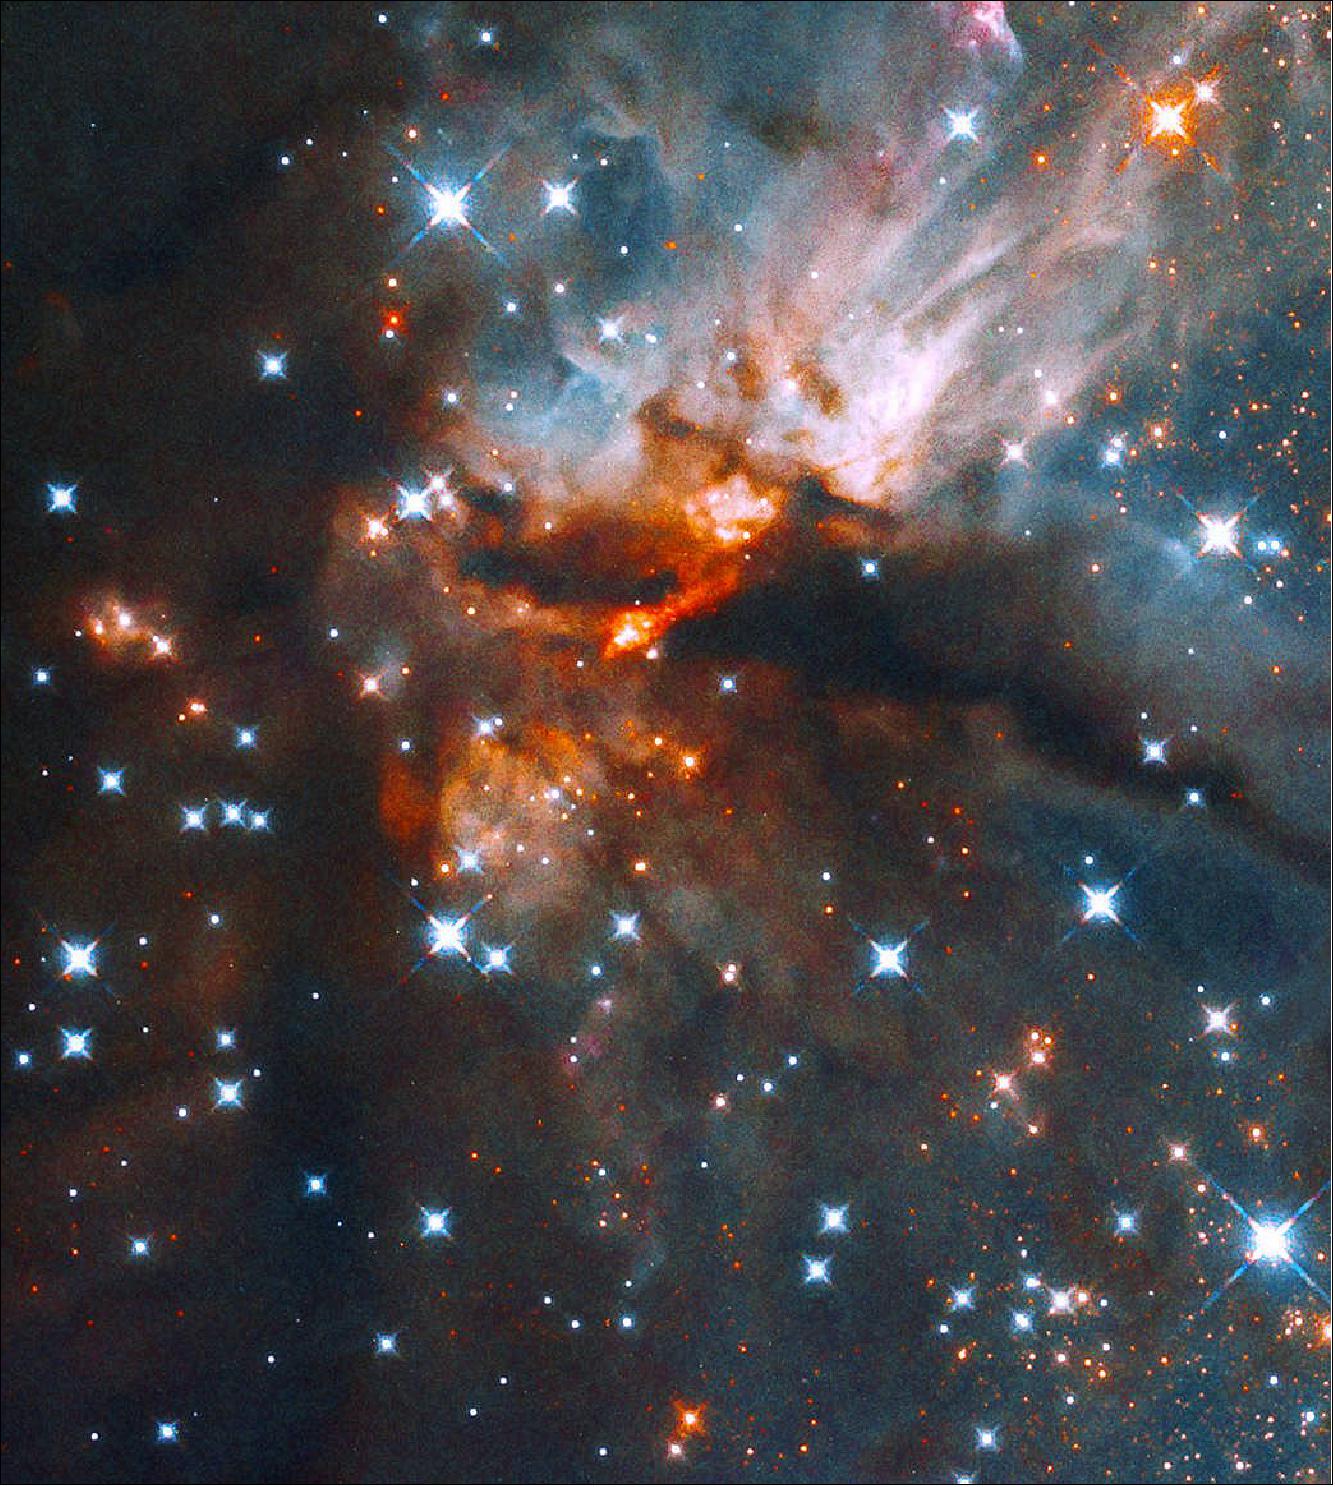 Figure 19: Researchers combined infrared observations from Hubble with those from radio telescopes in order to see inside these dusty star-forming regions. They found a jet of material with properties similar to jets associated with young, low-mass stars. This implies that the mechanism creating the light emitted by these jets is similar in young stars of different masses, up to 10 times the mass of the Sun [image credit: NASA, ESA, and J. Tan (Chalmers University of Technology); Processing; Gladys Kober (NASA/Catholic University of America)]